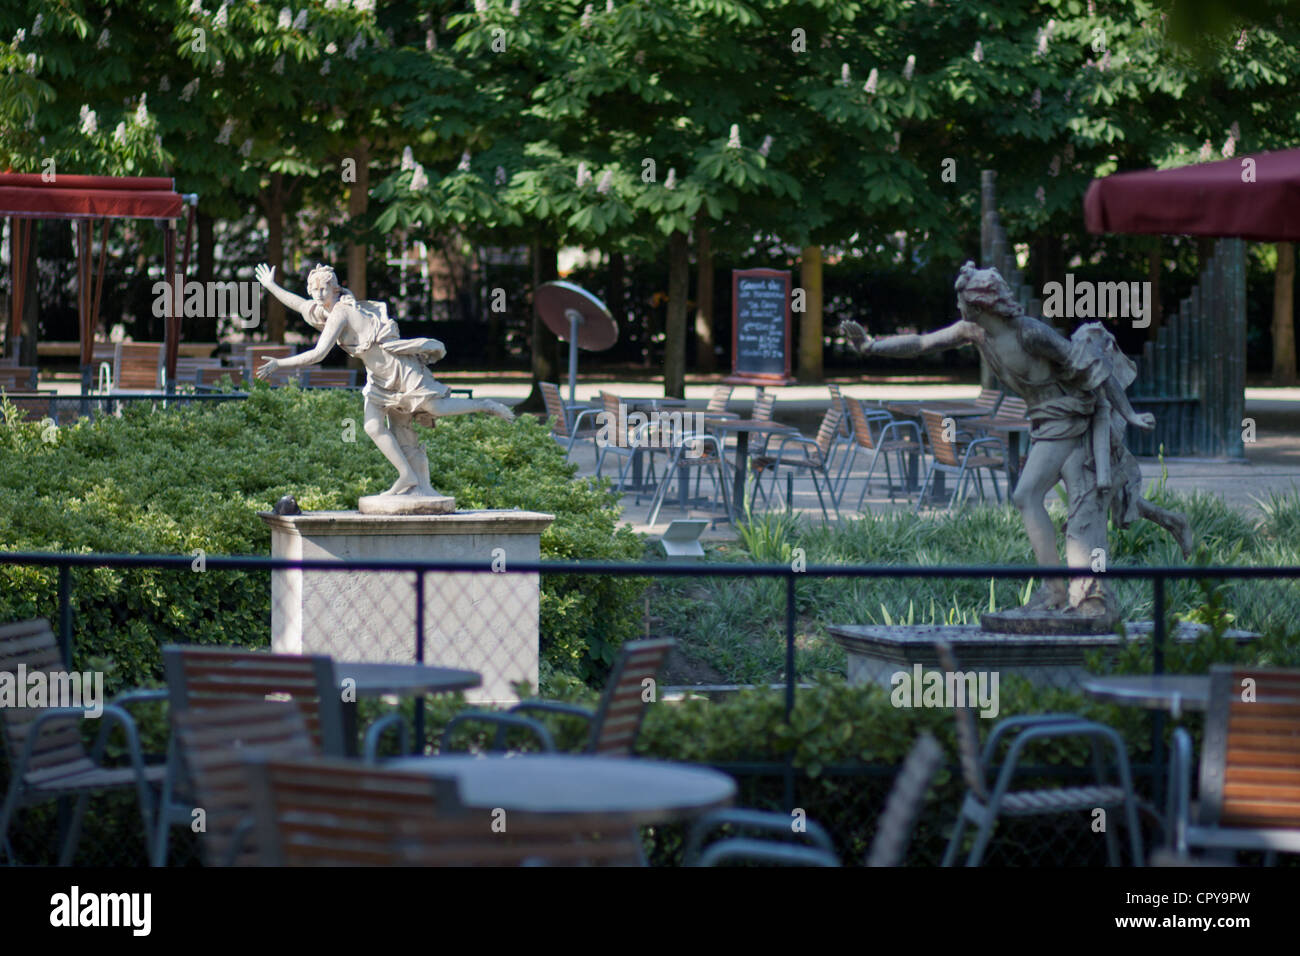 A pair of statues in the Tuileries Gardens who appear to be chasing each other, in perpetuity Stock Photo